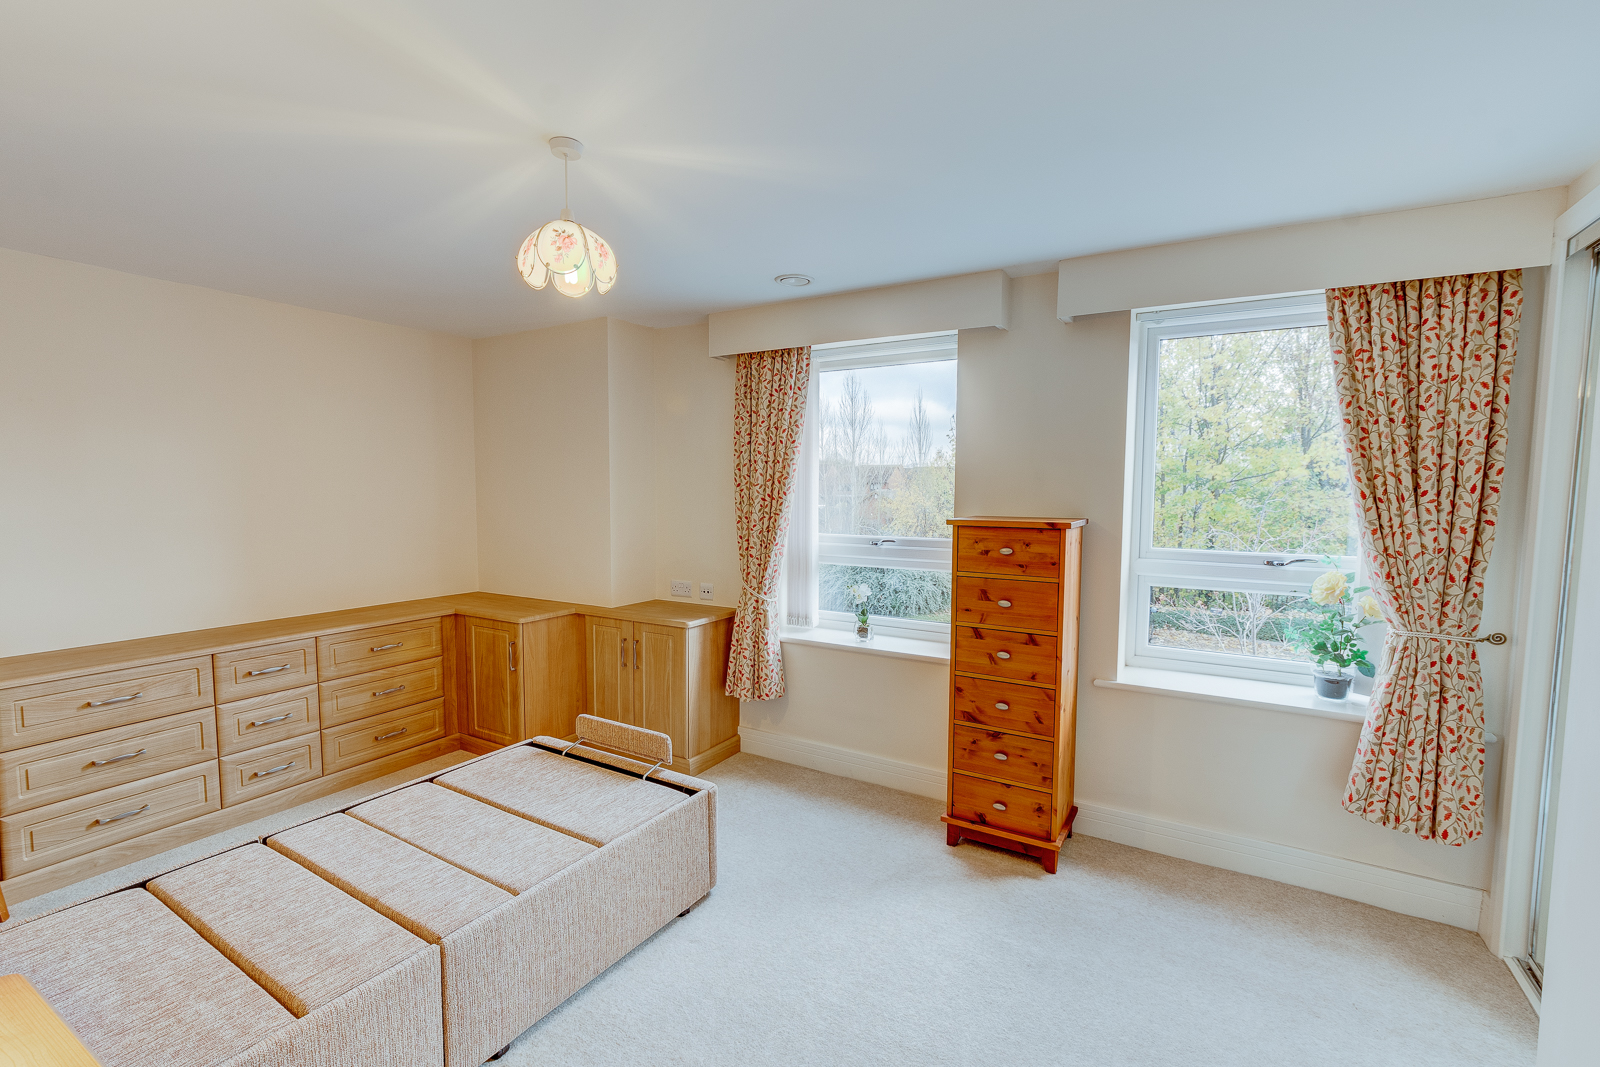 1 bed  for sale in Hanbury Road, Droitwich  - Property Image 3